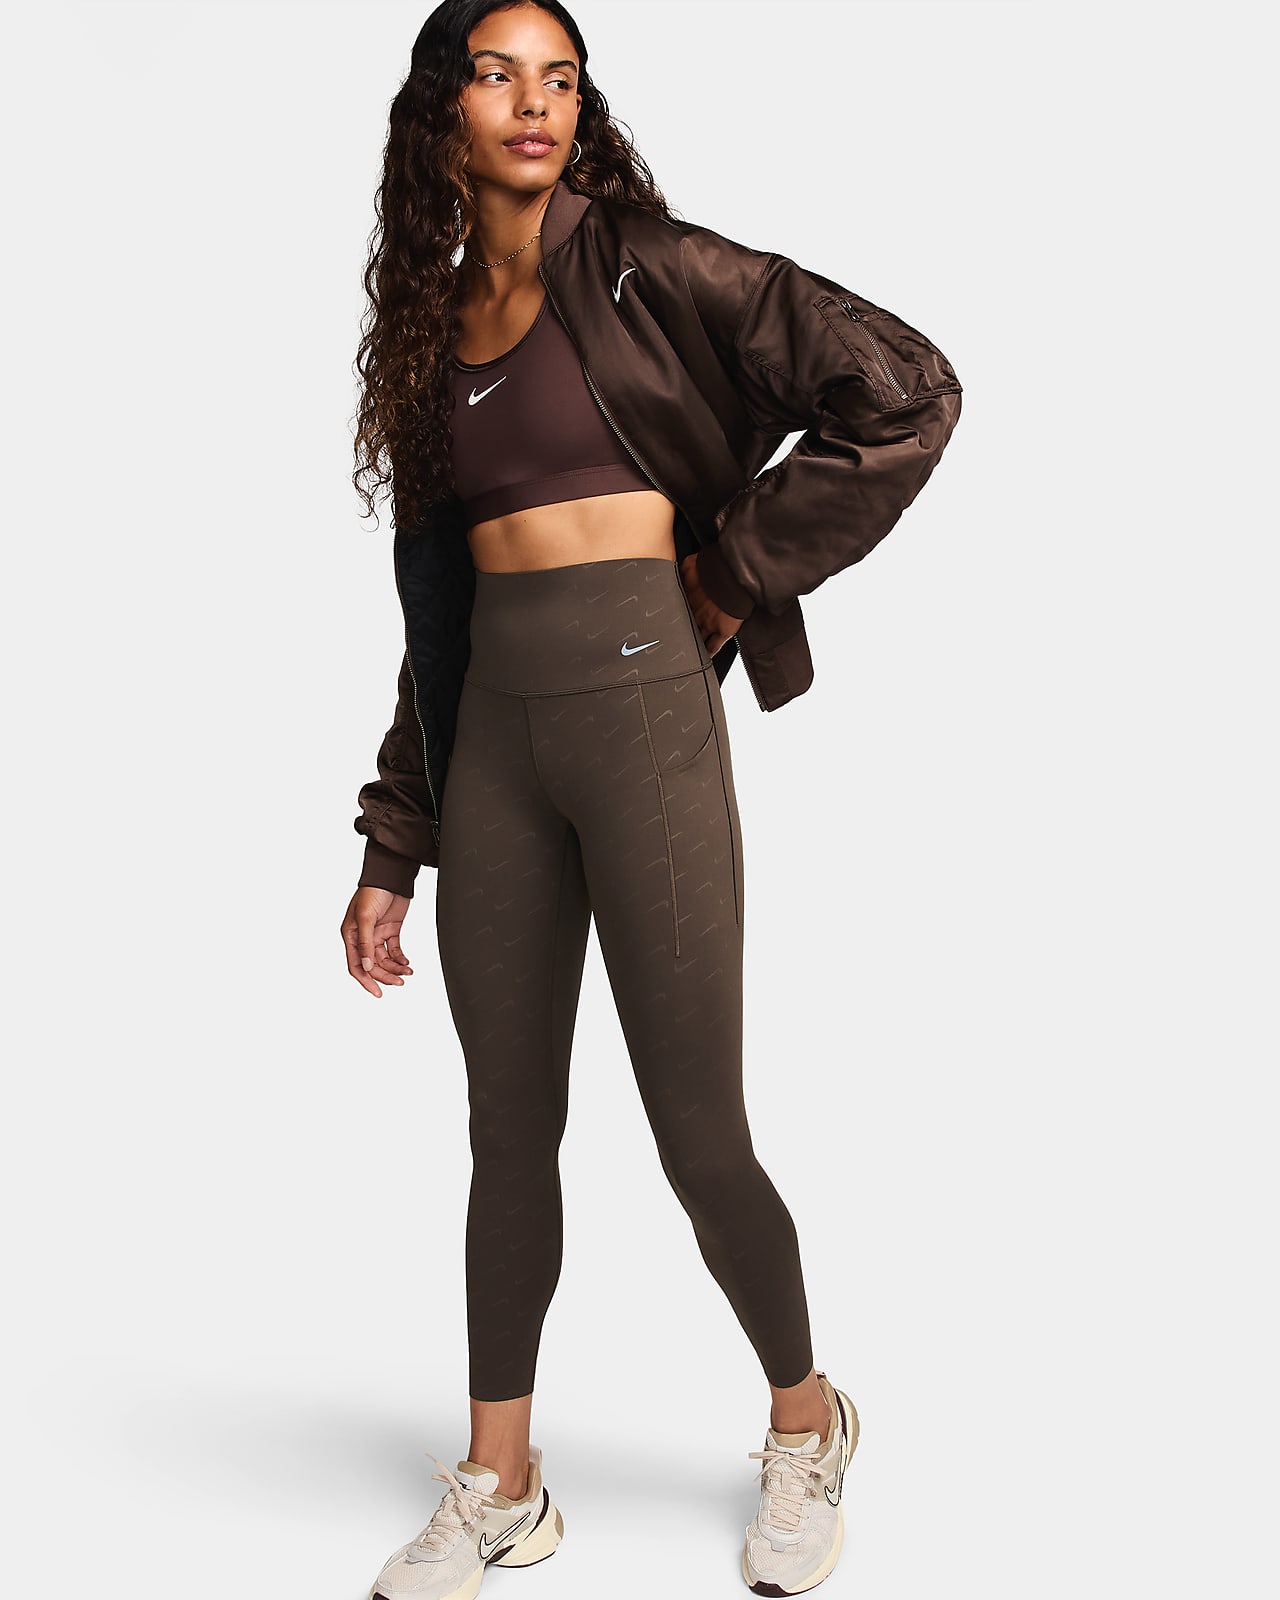 Nike Universa Women's Medium-Support High-Waisted 7/8 Printed Leggings with Pockets